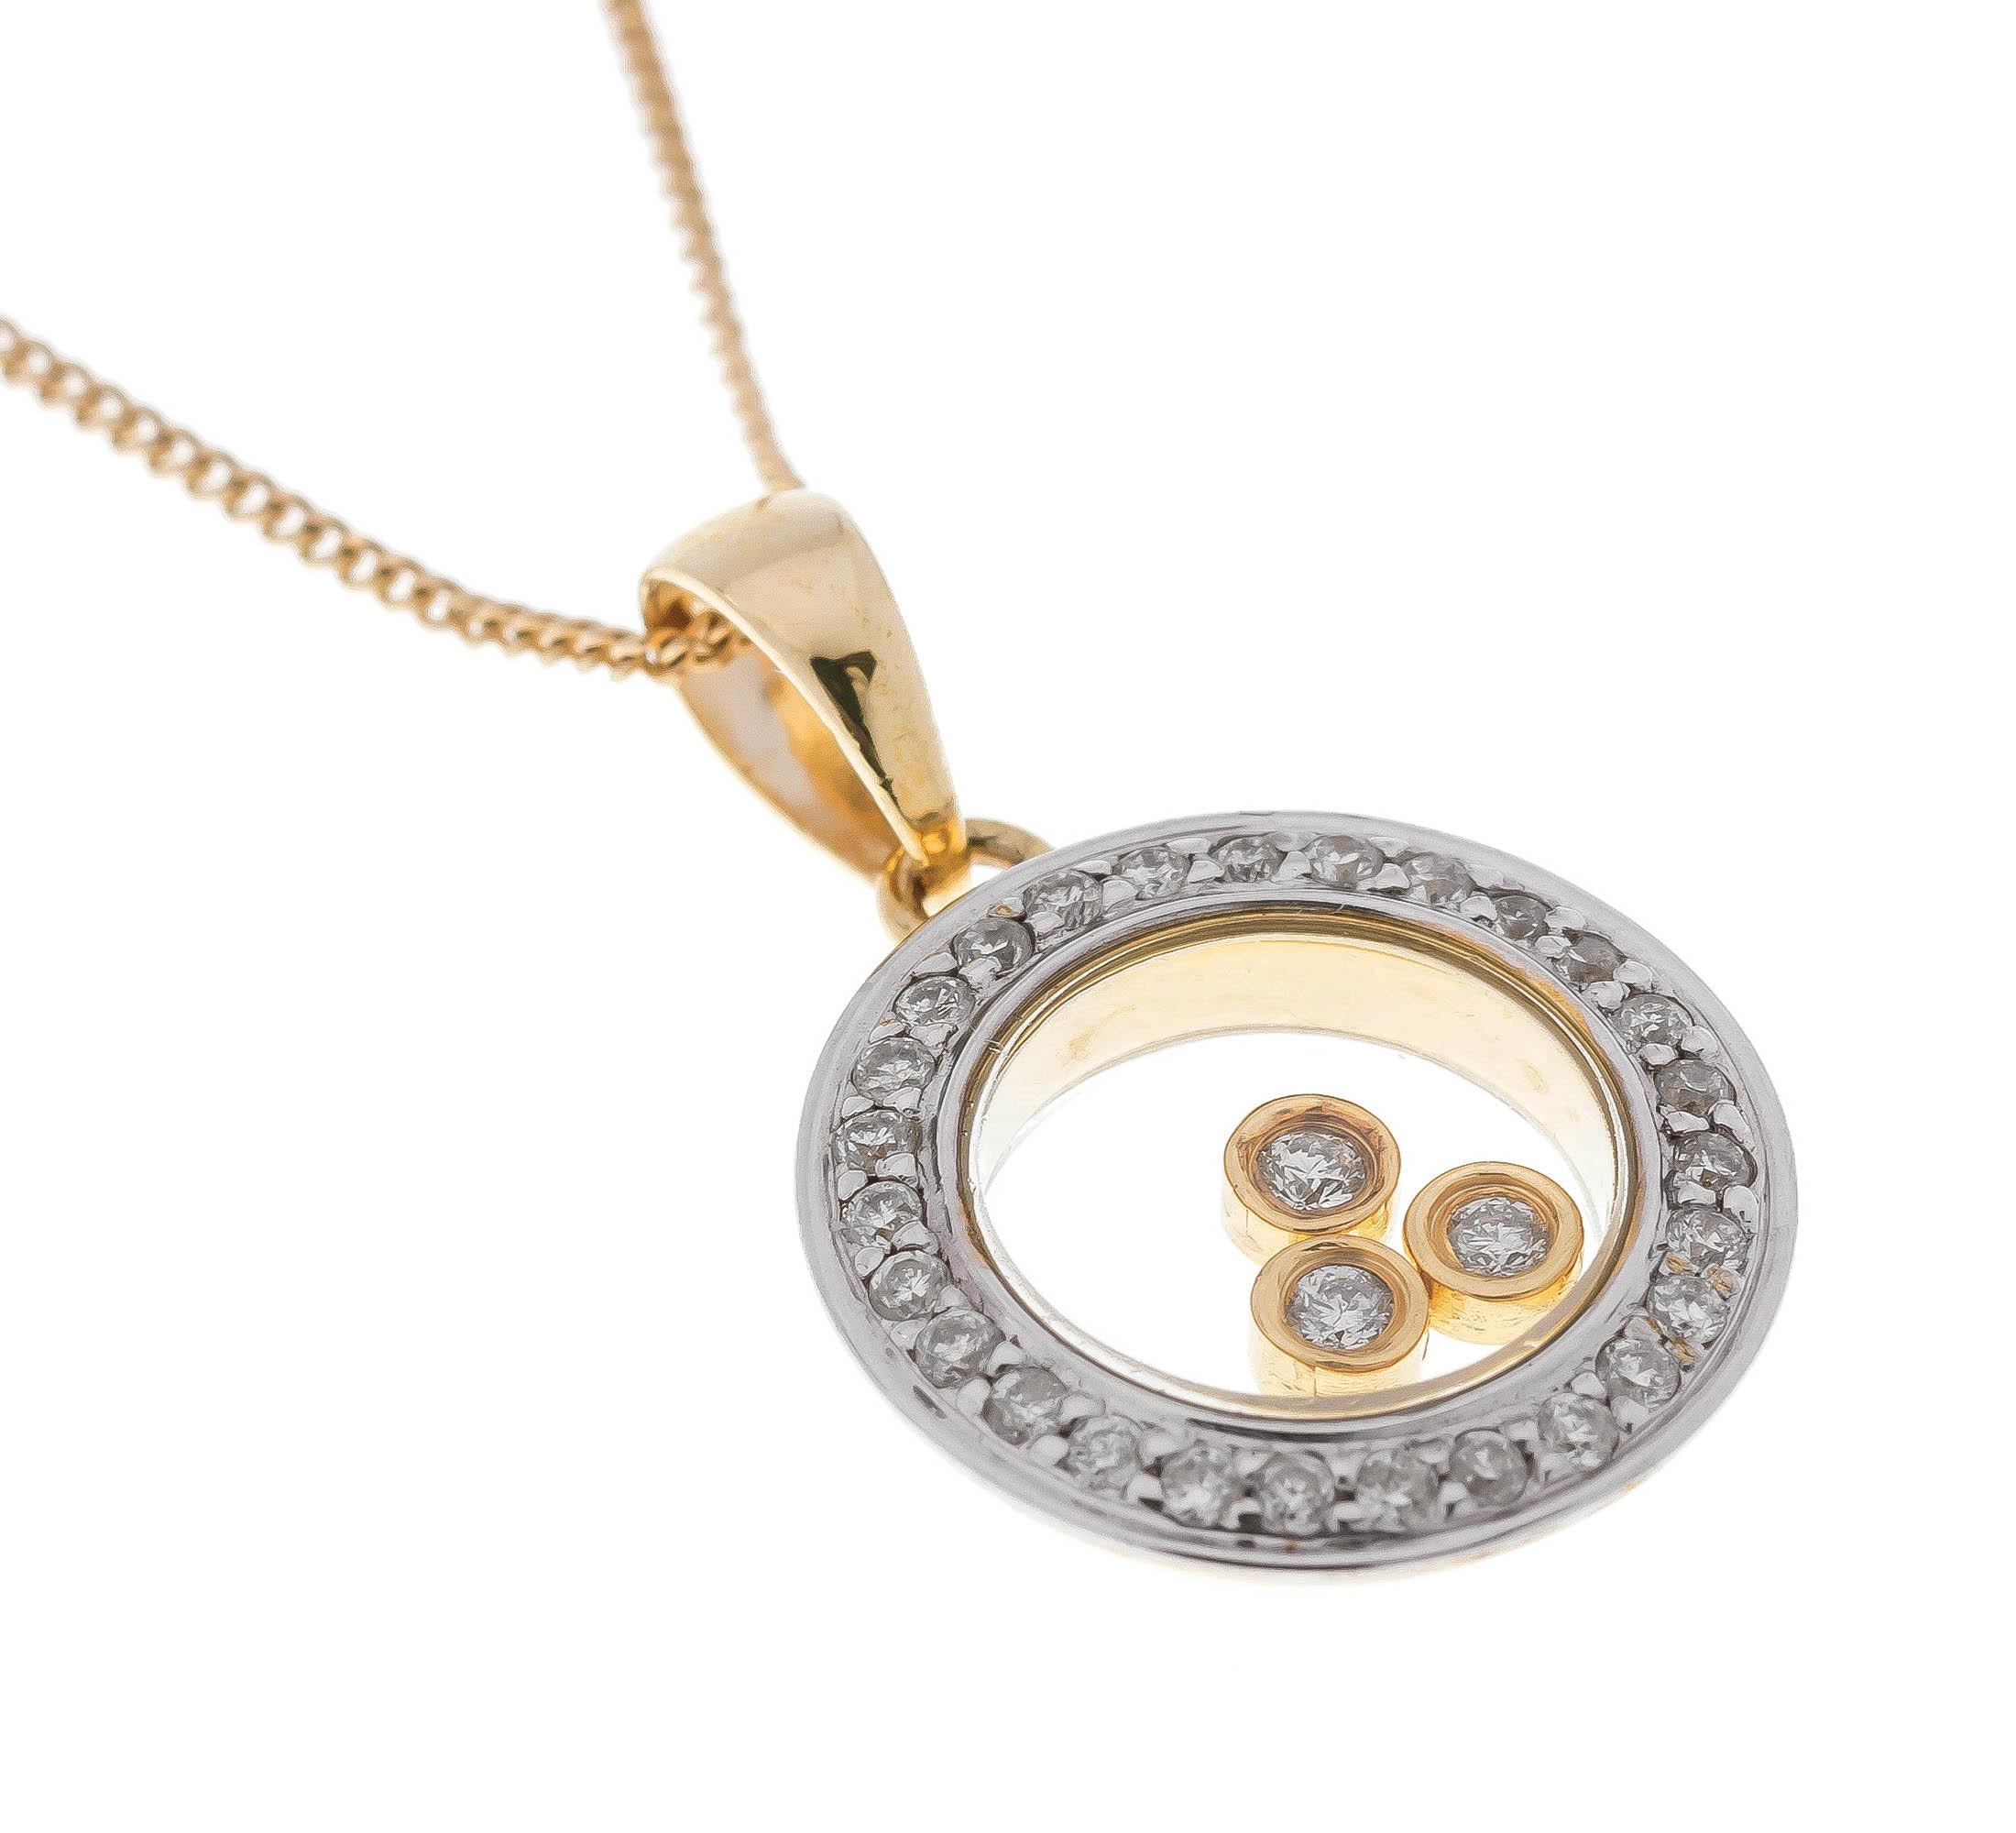 This gorgeous pendant, designed as a white gold diamond circle, surrounding three floating diamonds, each set in a yellow gold collet.

A fun and playful pendant, that can be worn day or night. a gorgeous gift for Christmas.

SPECIFICATION
Weight